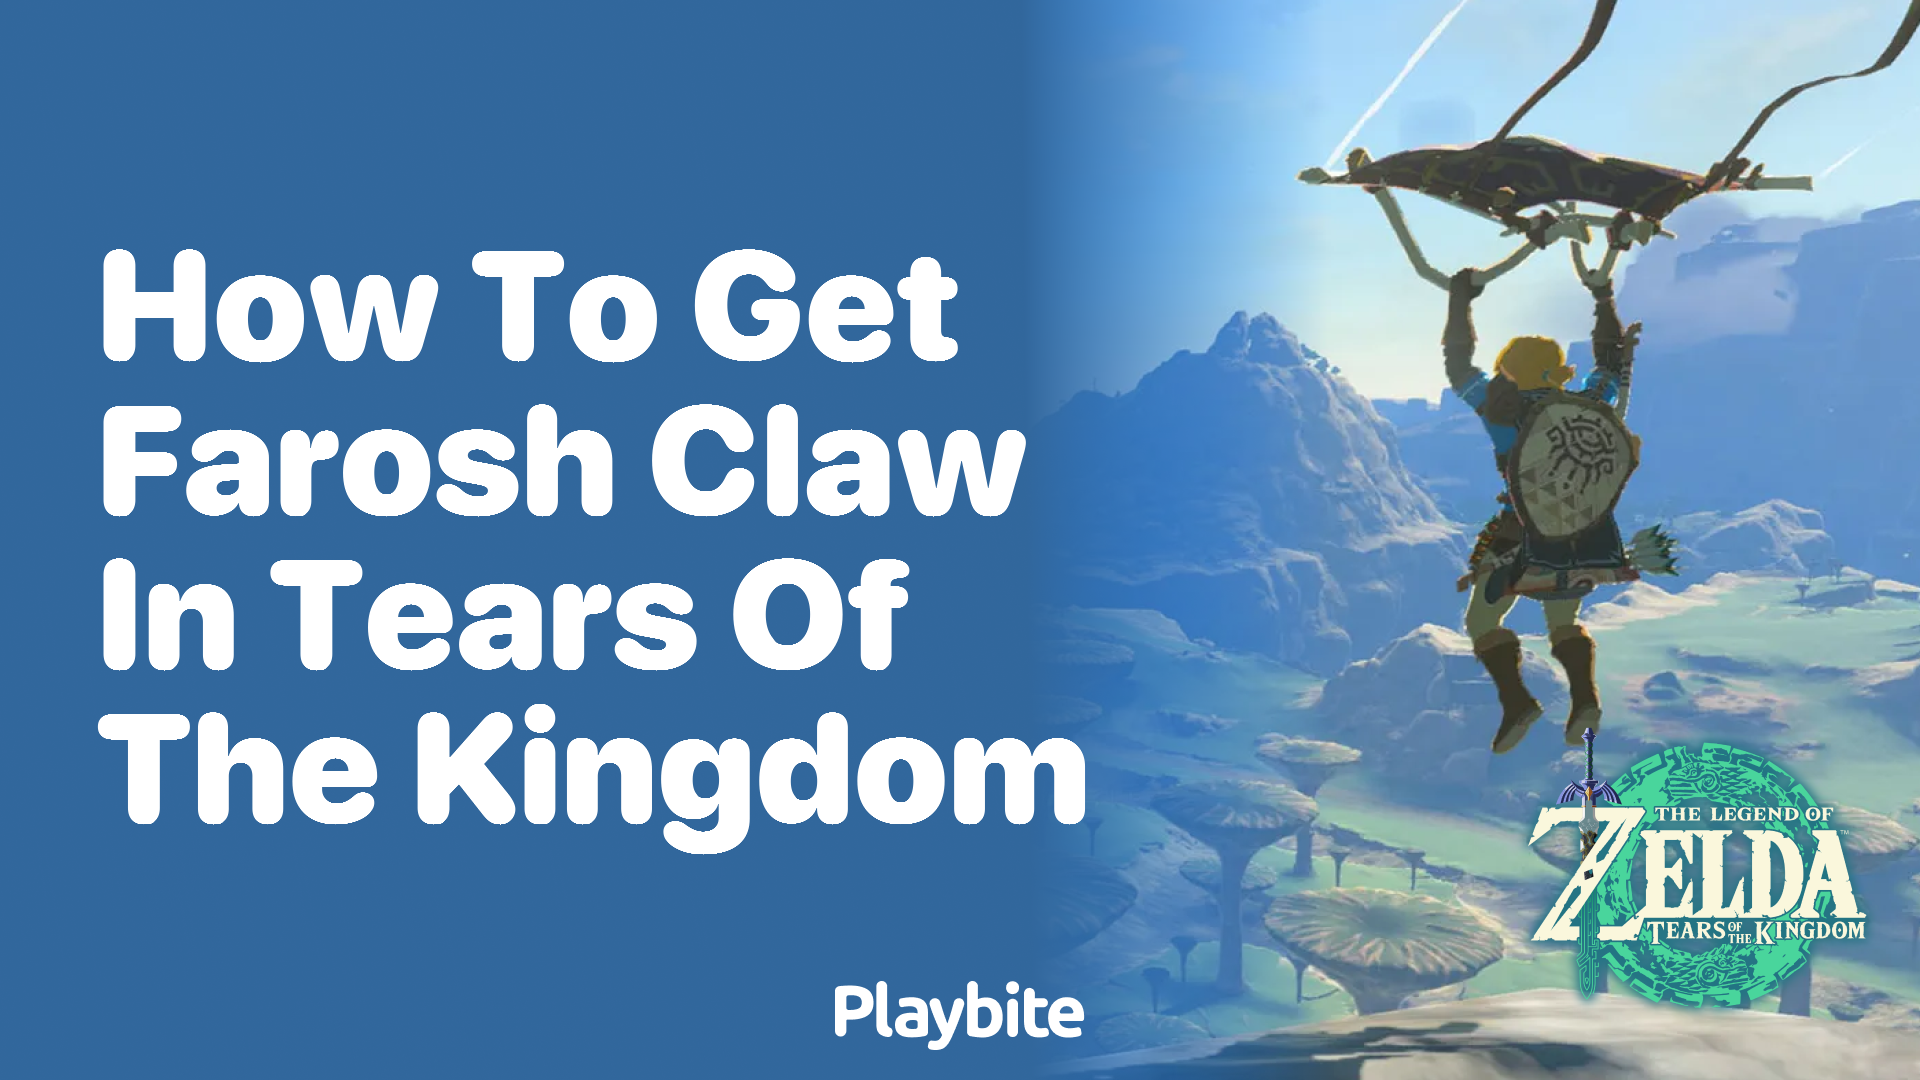 How to Get Farosh Claw in Tears of the Kingdom